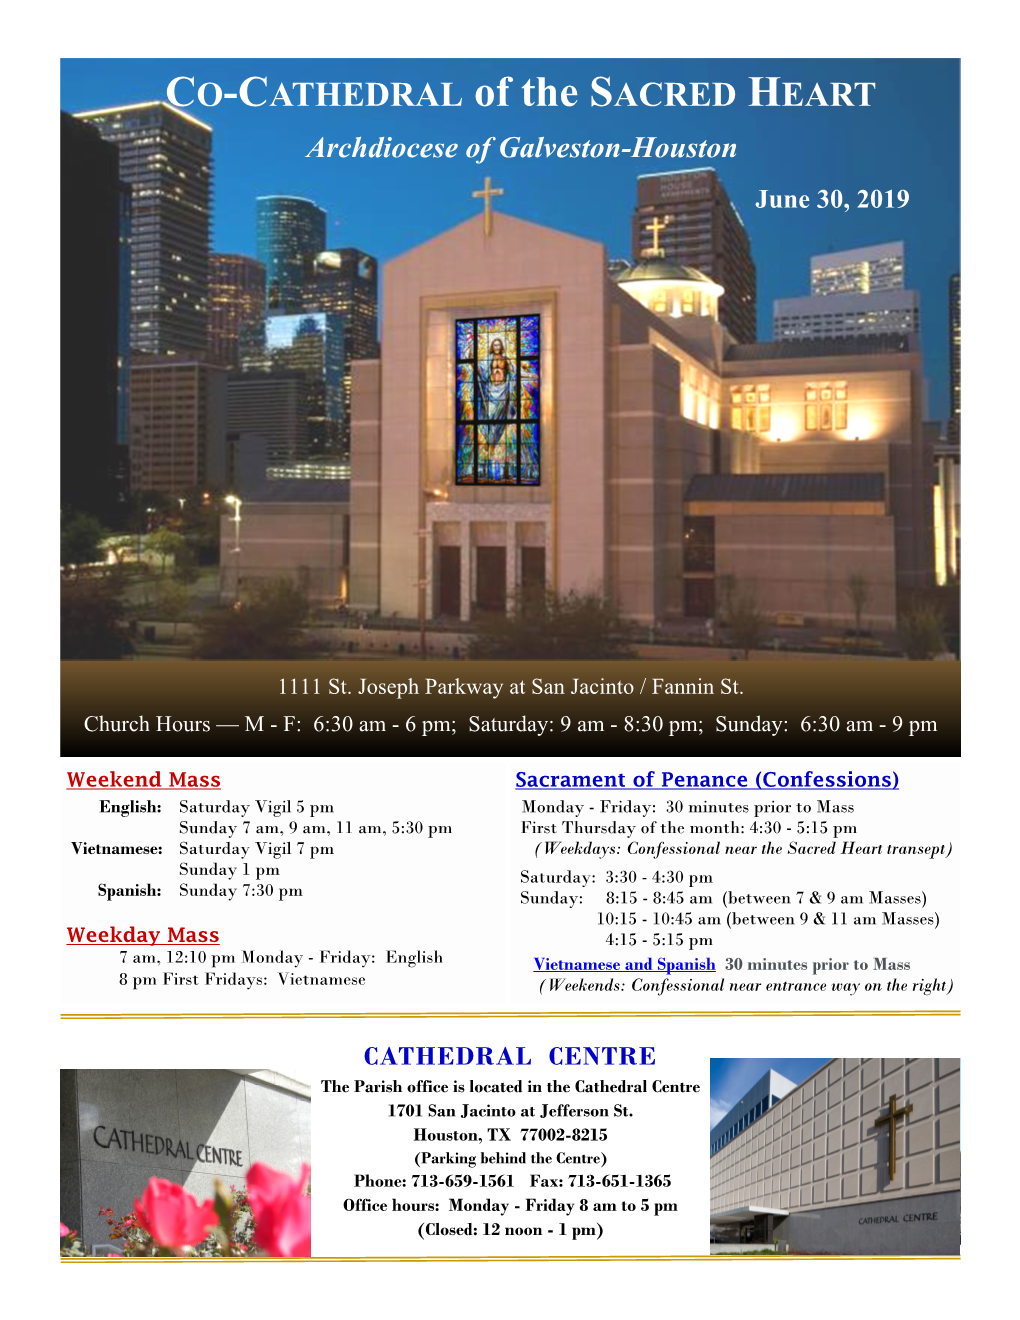 CO-CATHEDRAL of the SACRED HEART Archdiocese of Galveston-Houston June 30, 2019